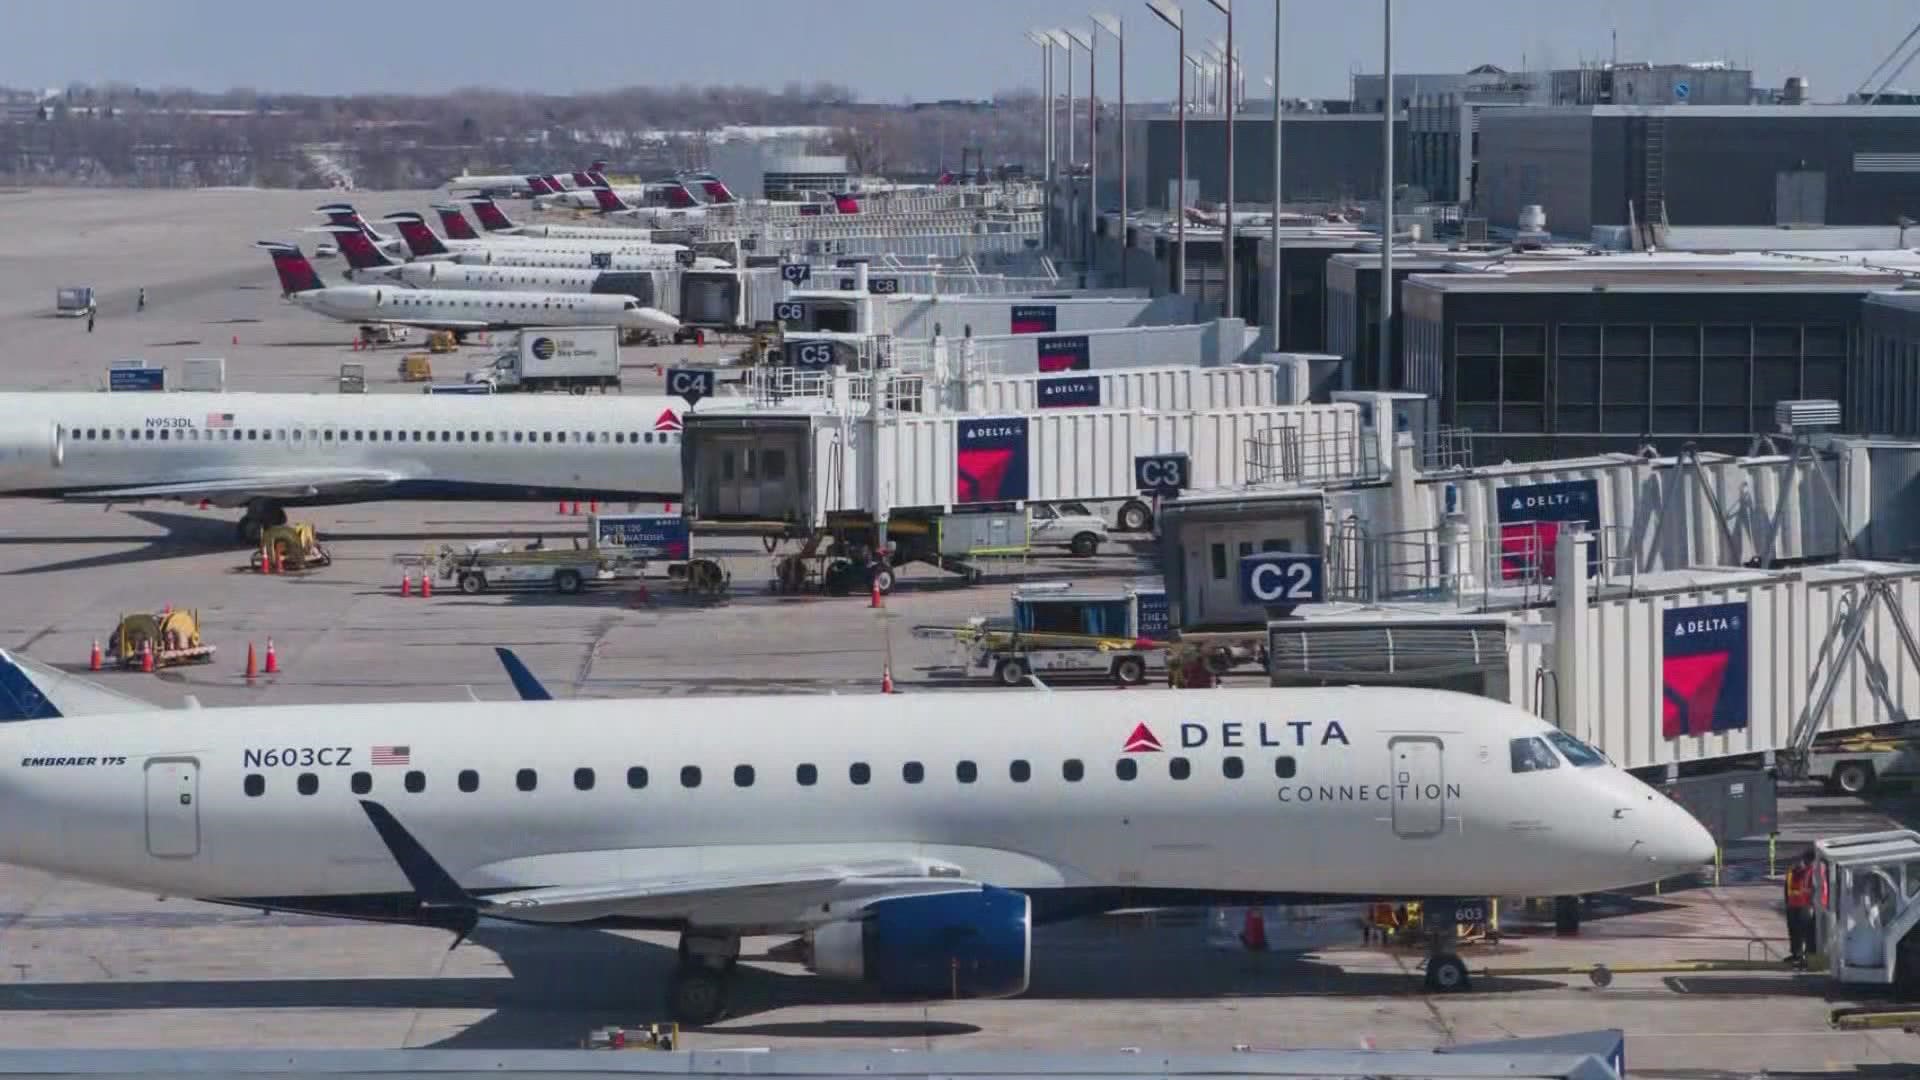 There were more than 17,000 flight cancellations due to an FAA system failure.